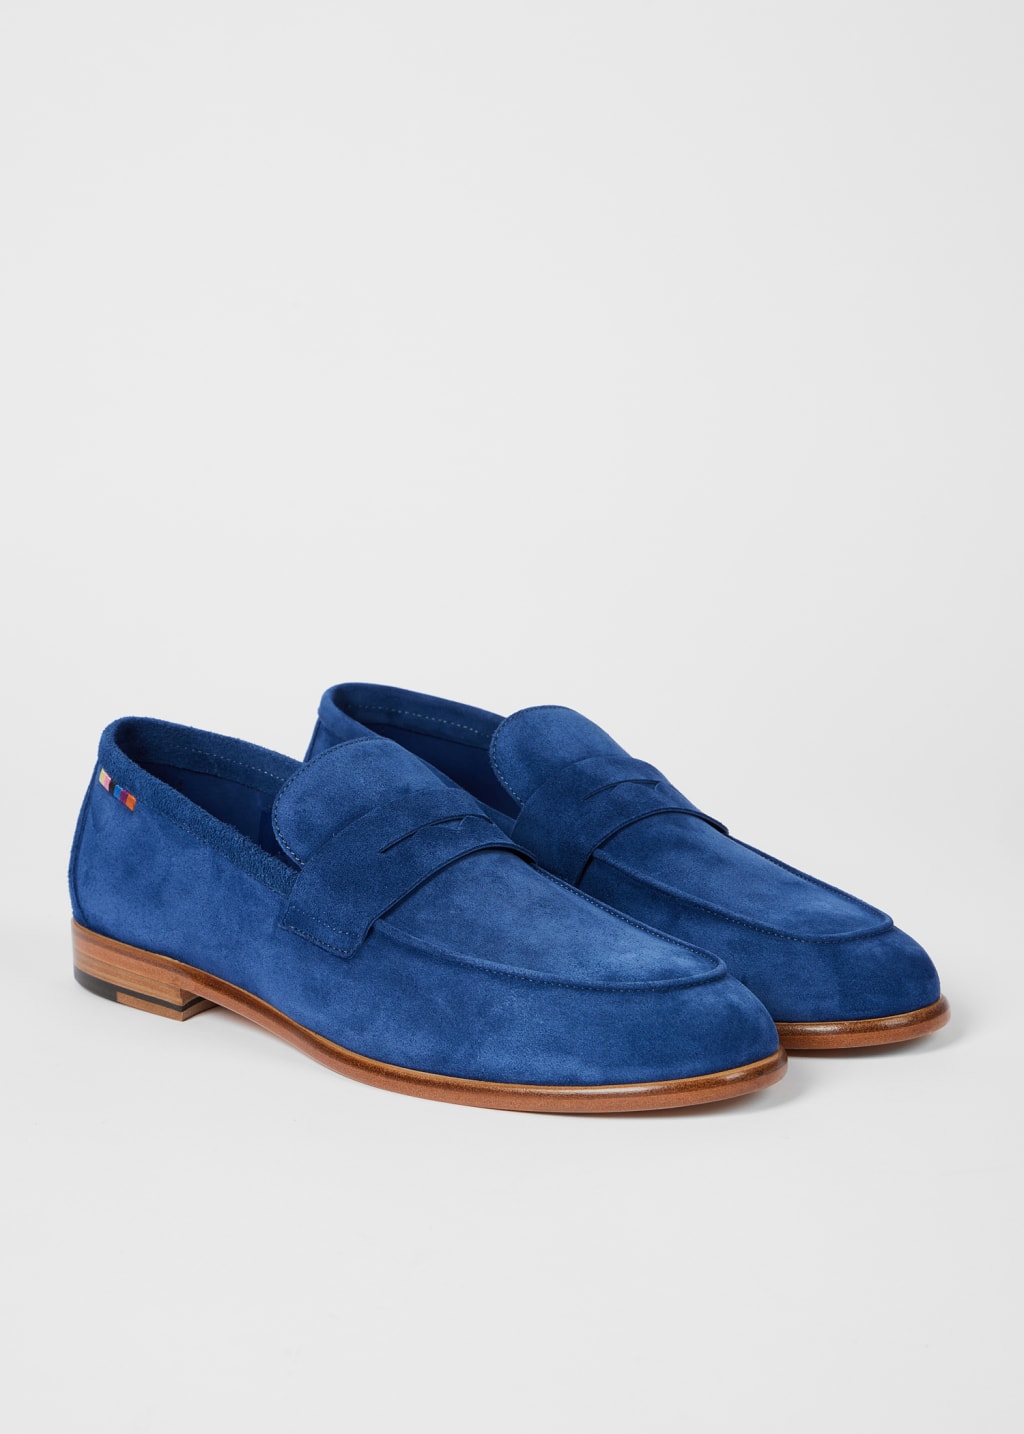 Pair View - Blue Suede 'Figaro' Loafers Paul Smith